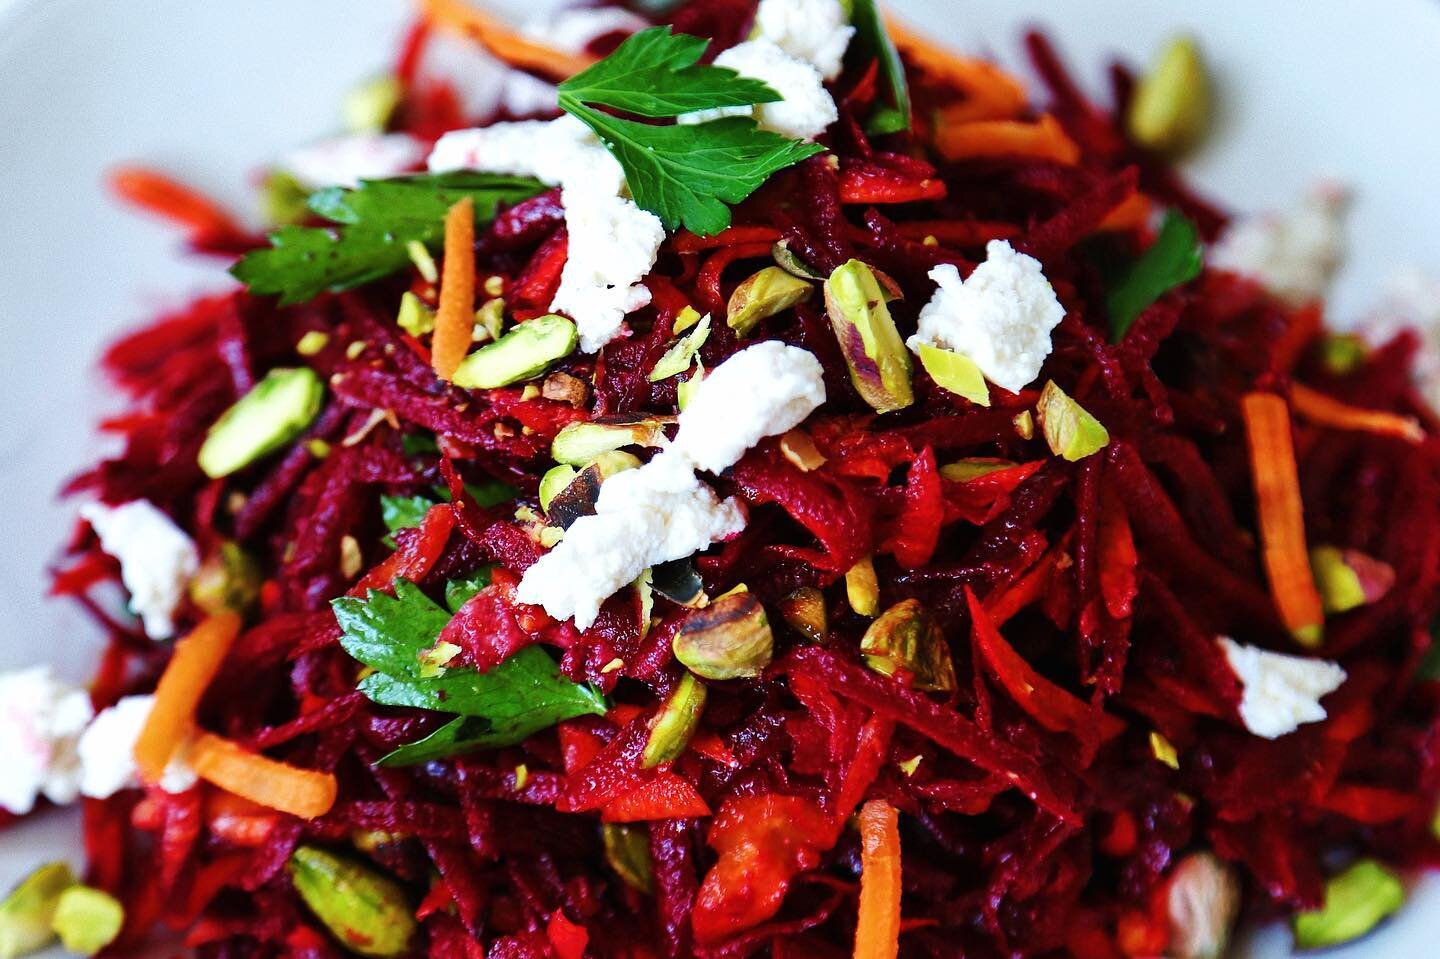 Mediterranean-inspired loaded beet slaw! ⁣
⁣
Made with grated beets and carrots, parsley, pistachios, plant-based feta and a simple homemade herby Greek dressing. ⁣
⁣
Packed with flavor and tons of good-for-you nutrients, it&rsquo;s as delicious as i